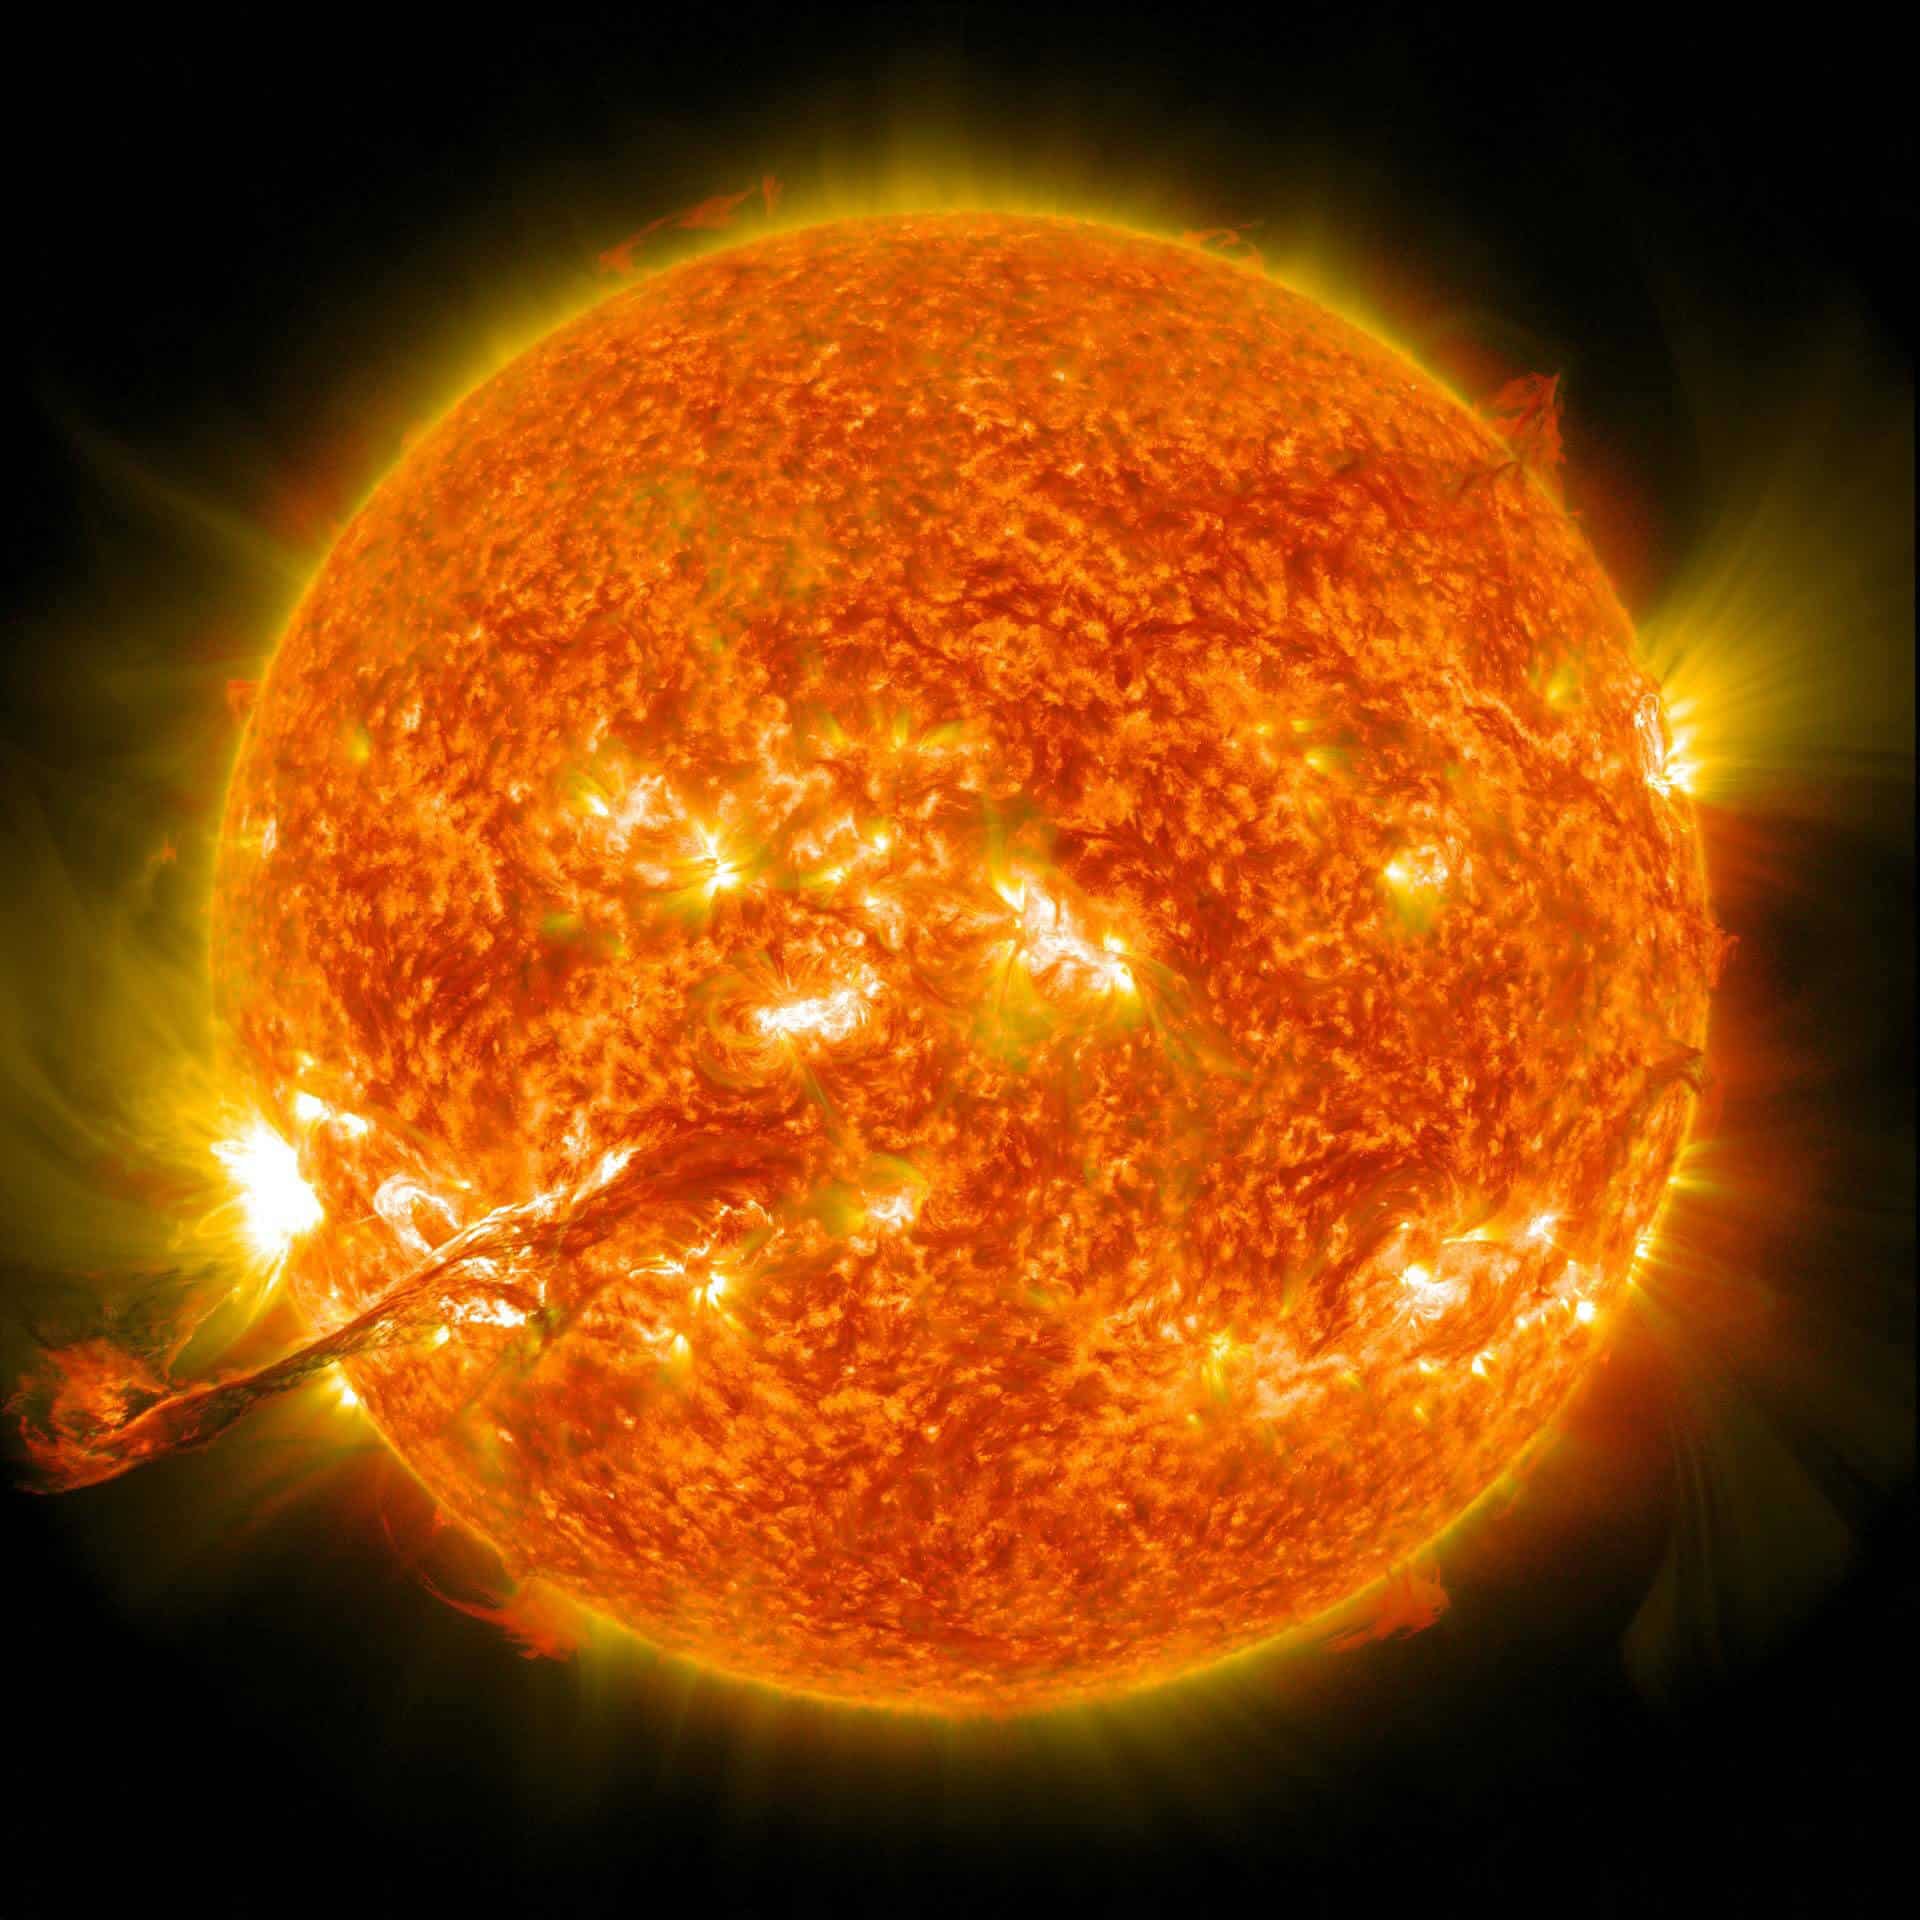 A coronal mass ejection erupting from our Sun on August 31, 2012. Photo: NASA/GSFC/SDO